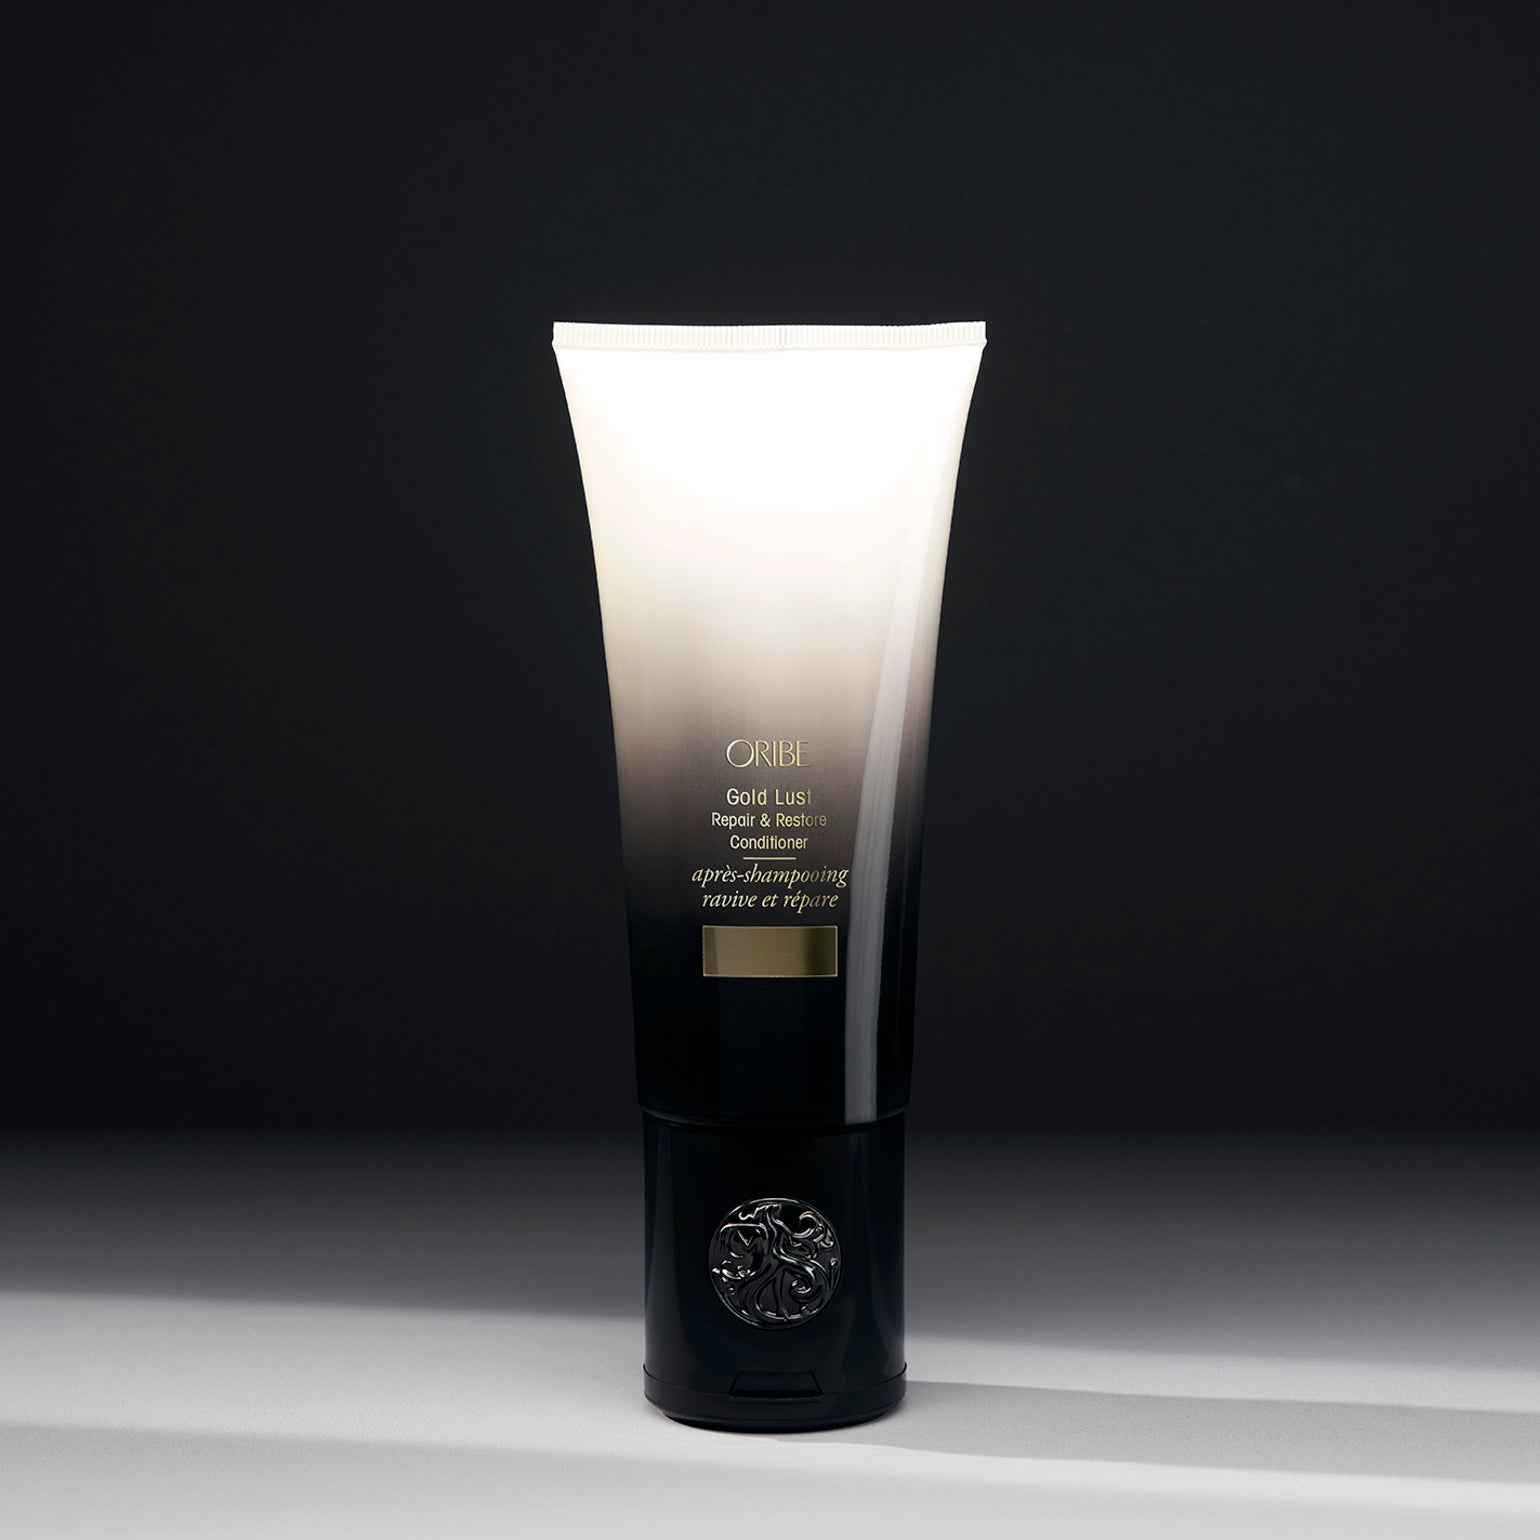 Gold Lust Conditioner by Oribe